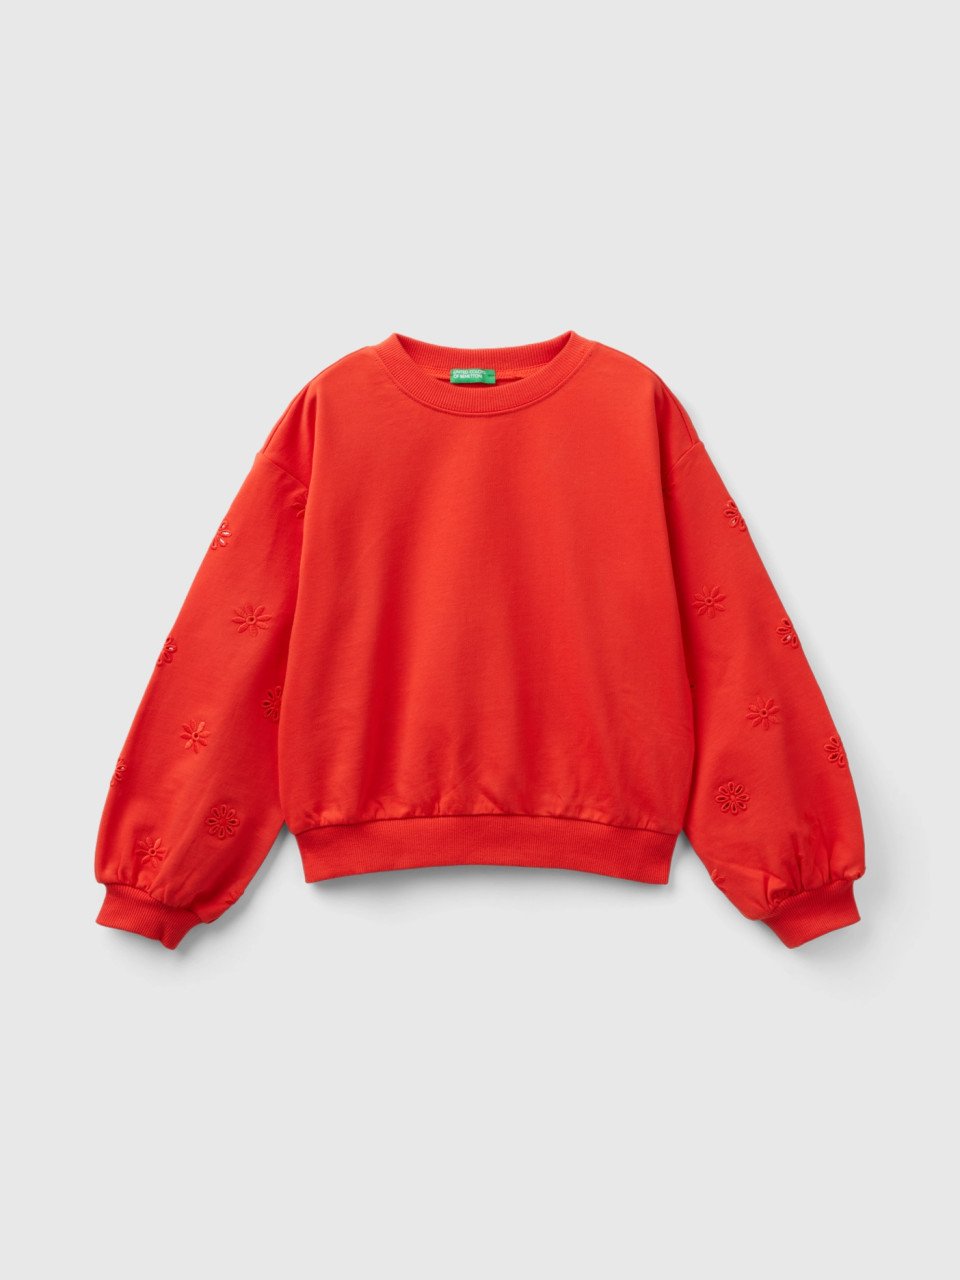 Benetton, Sweatshirt With Embroidered Flowers, Red, Kids